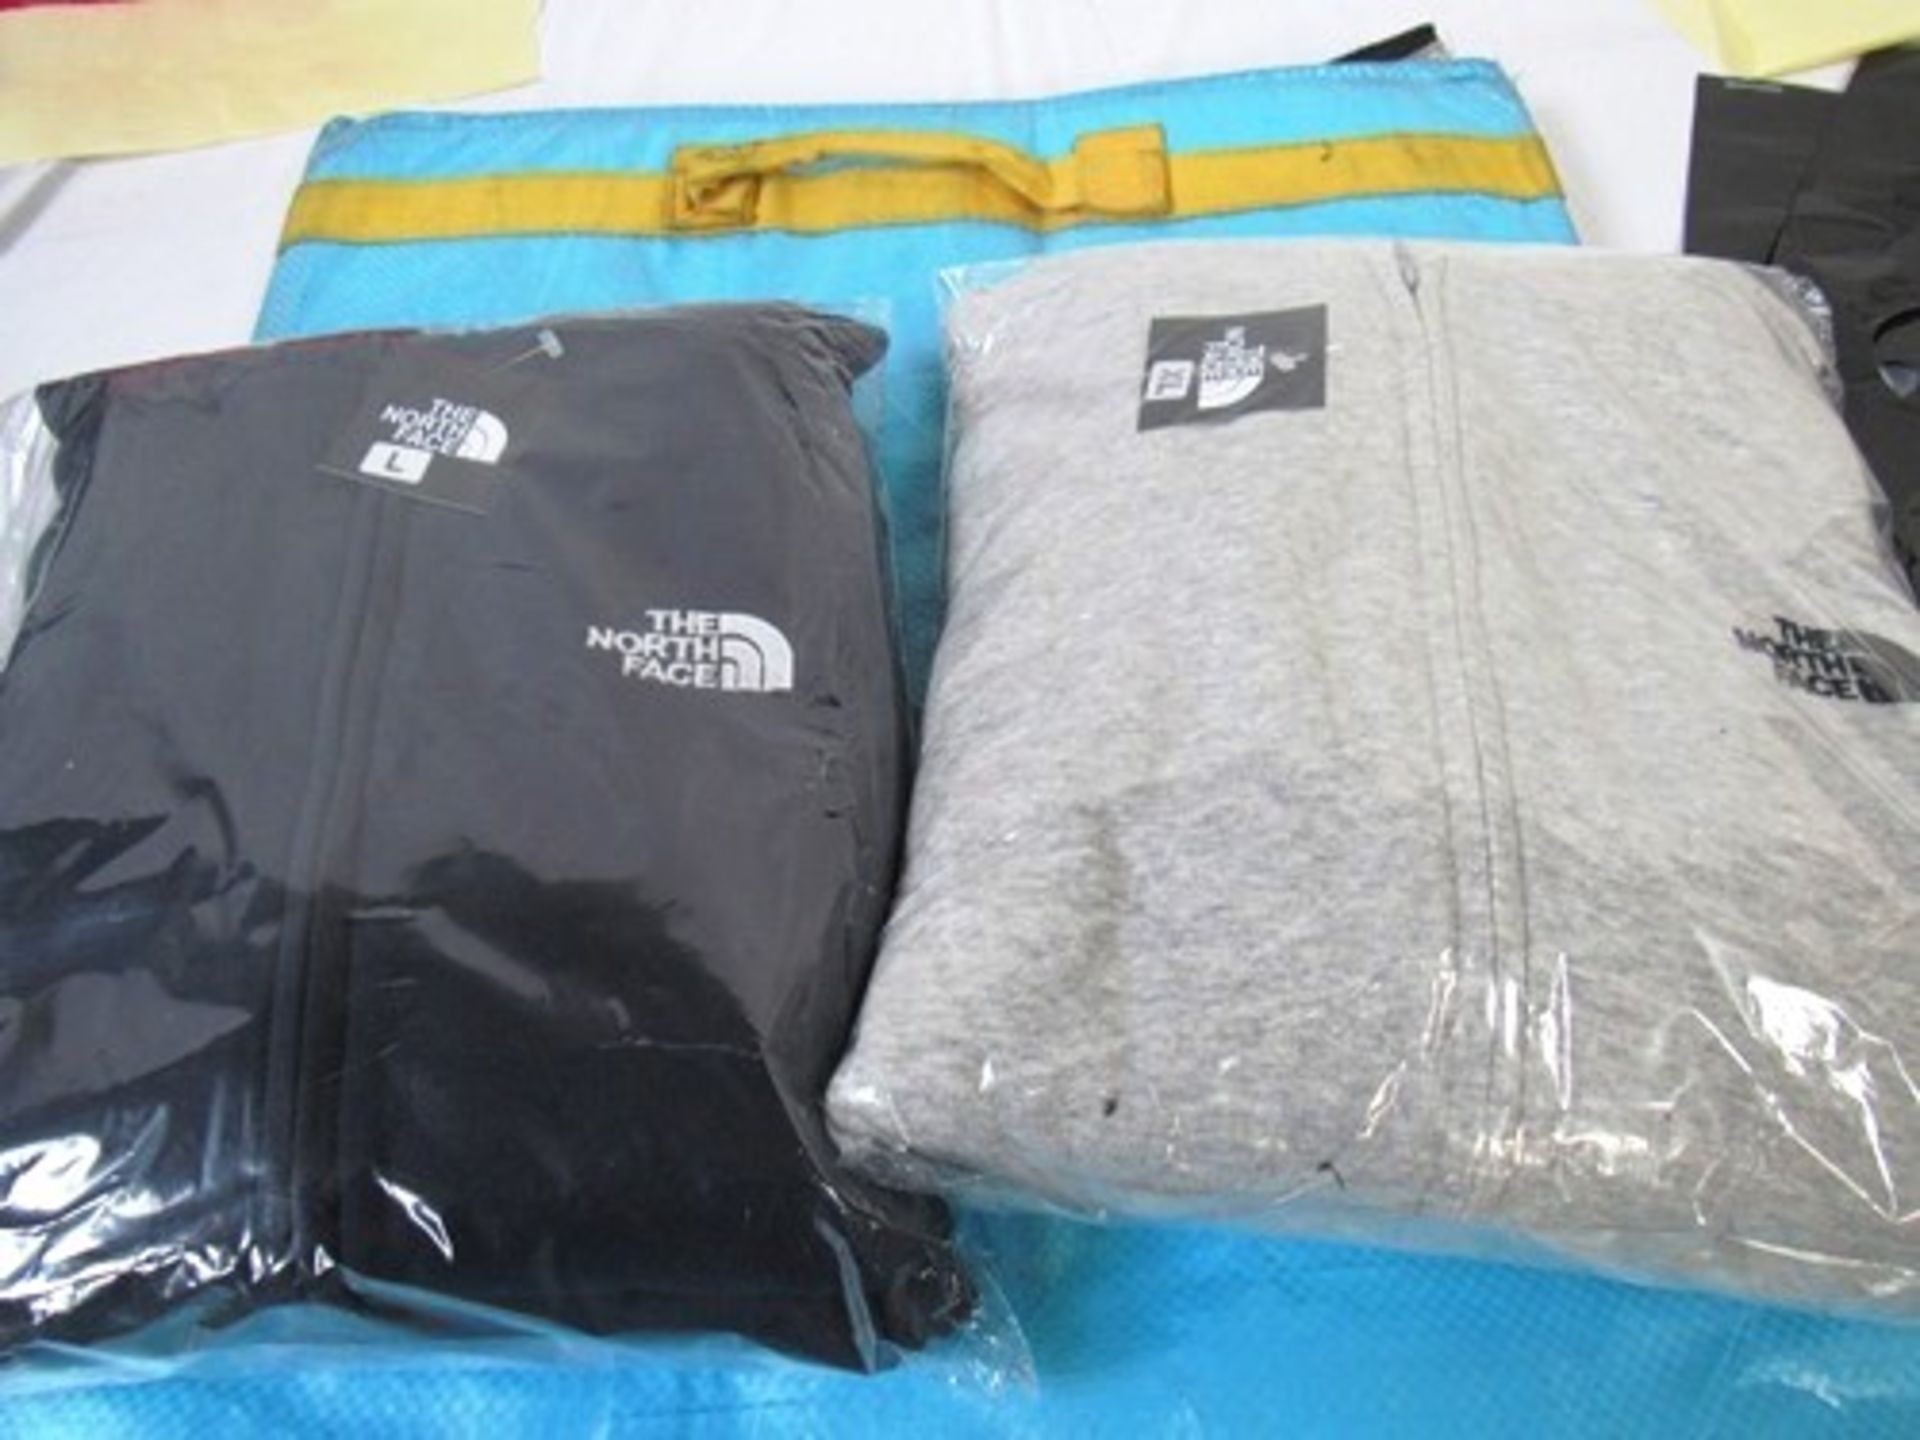 Approximately 20 x pieces of clothing in the style of North Face brand, sweatshirts and joggers, - Image 2 of 2